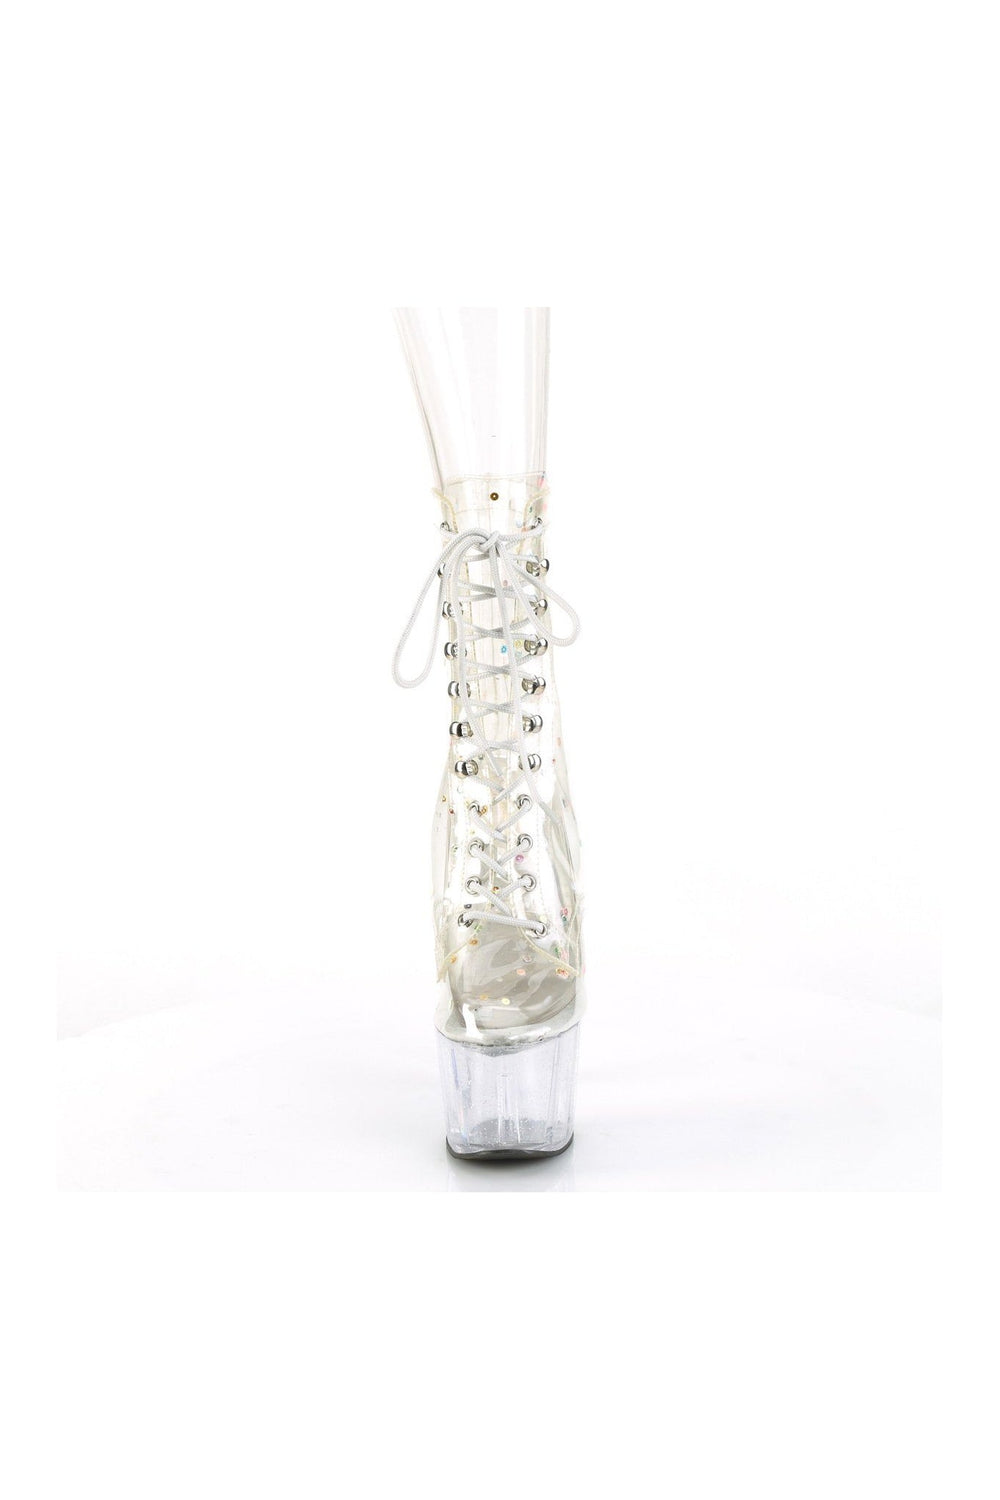 ADORE-1020C-2 Ankle Boot | Clear Faux Leather-Ankle Boots-Pleaser-SEXYSHOES.COM